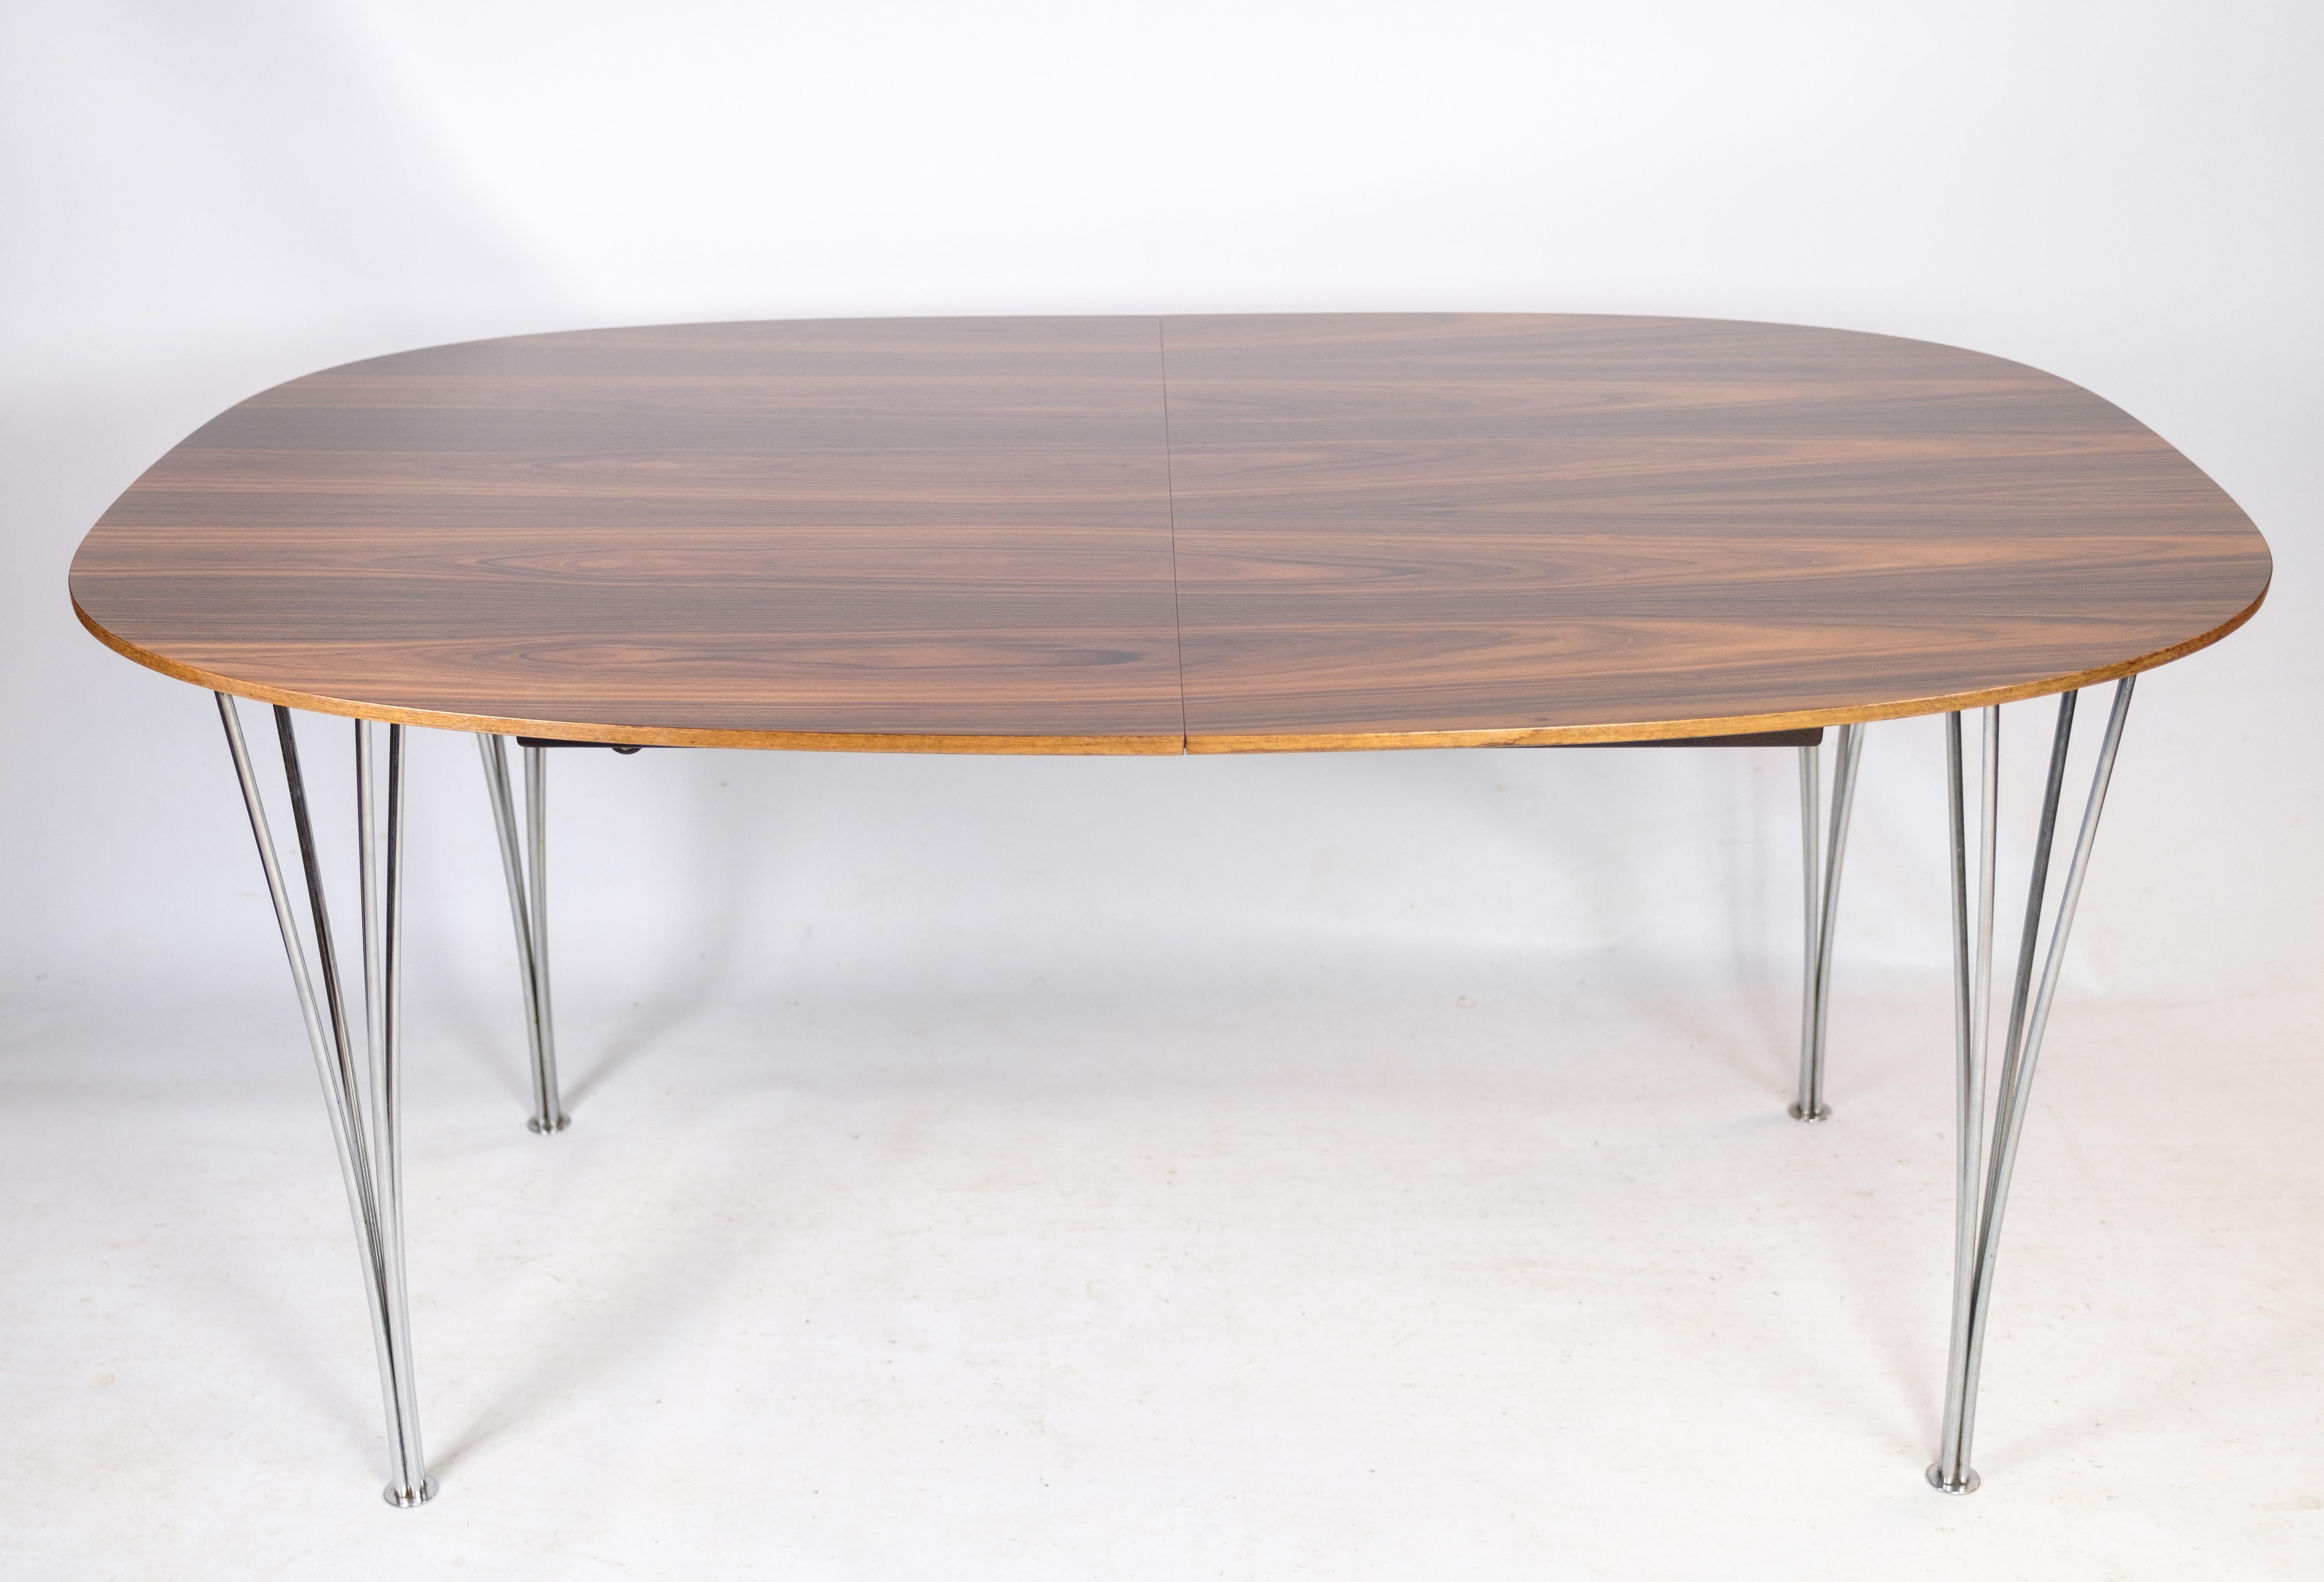 Aluminum Dining Table Made In Rosewood By Piet Hein & Bruno Mathsson From 1960s For Sale